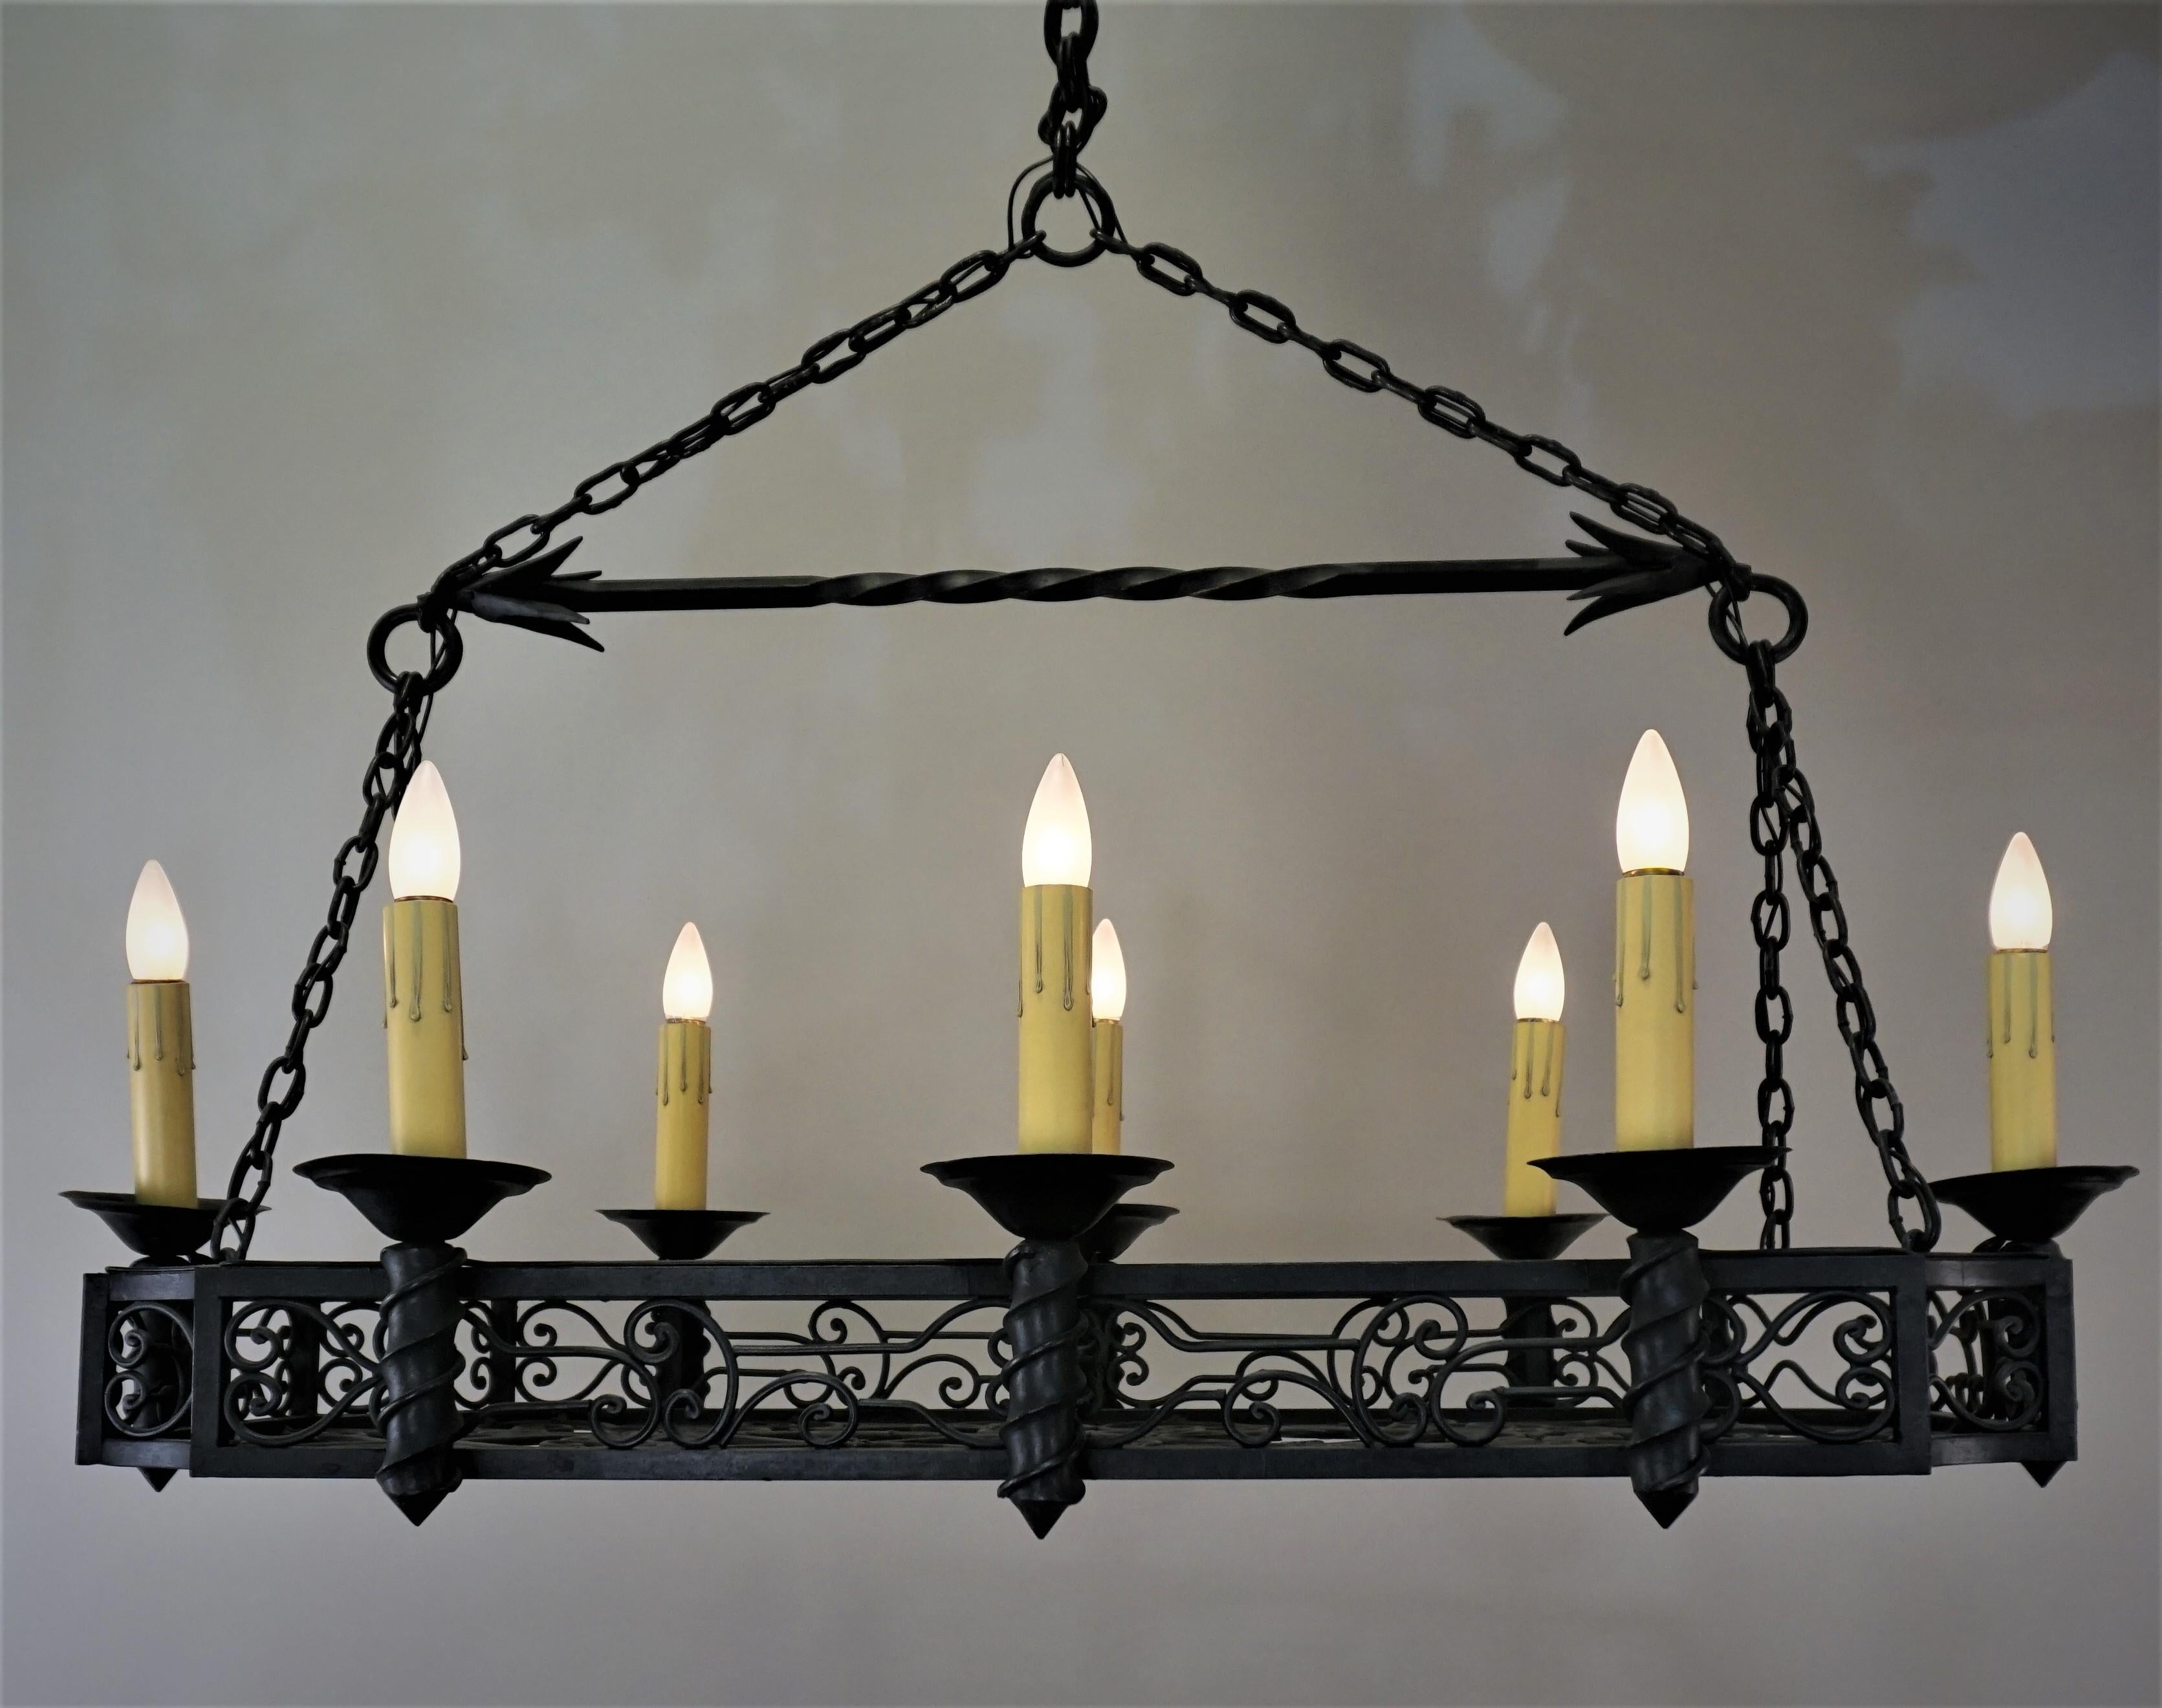 Elegant large oblong wrought iron chandelier. This beautiful chandelier was handcrafted in France, 1930s.
Measurement: 26